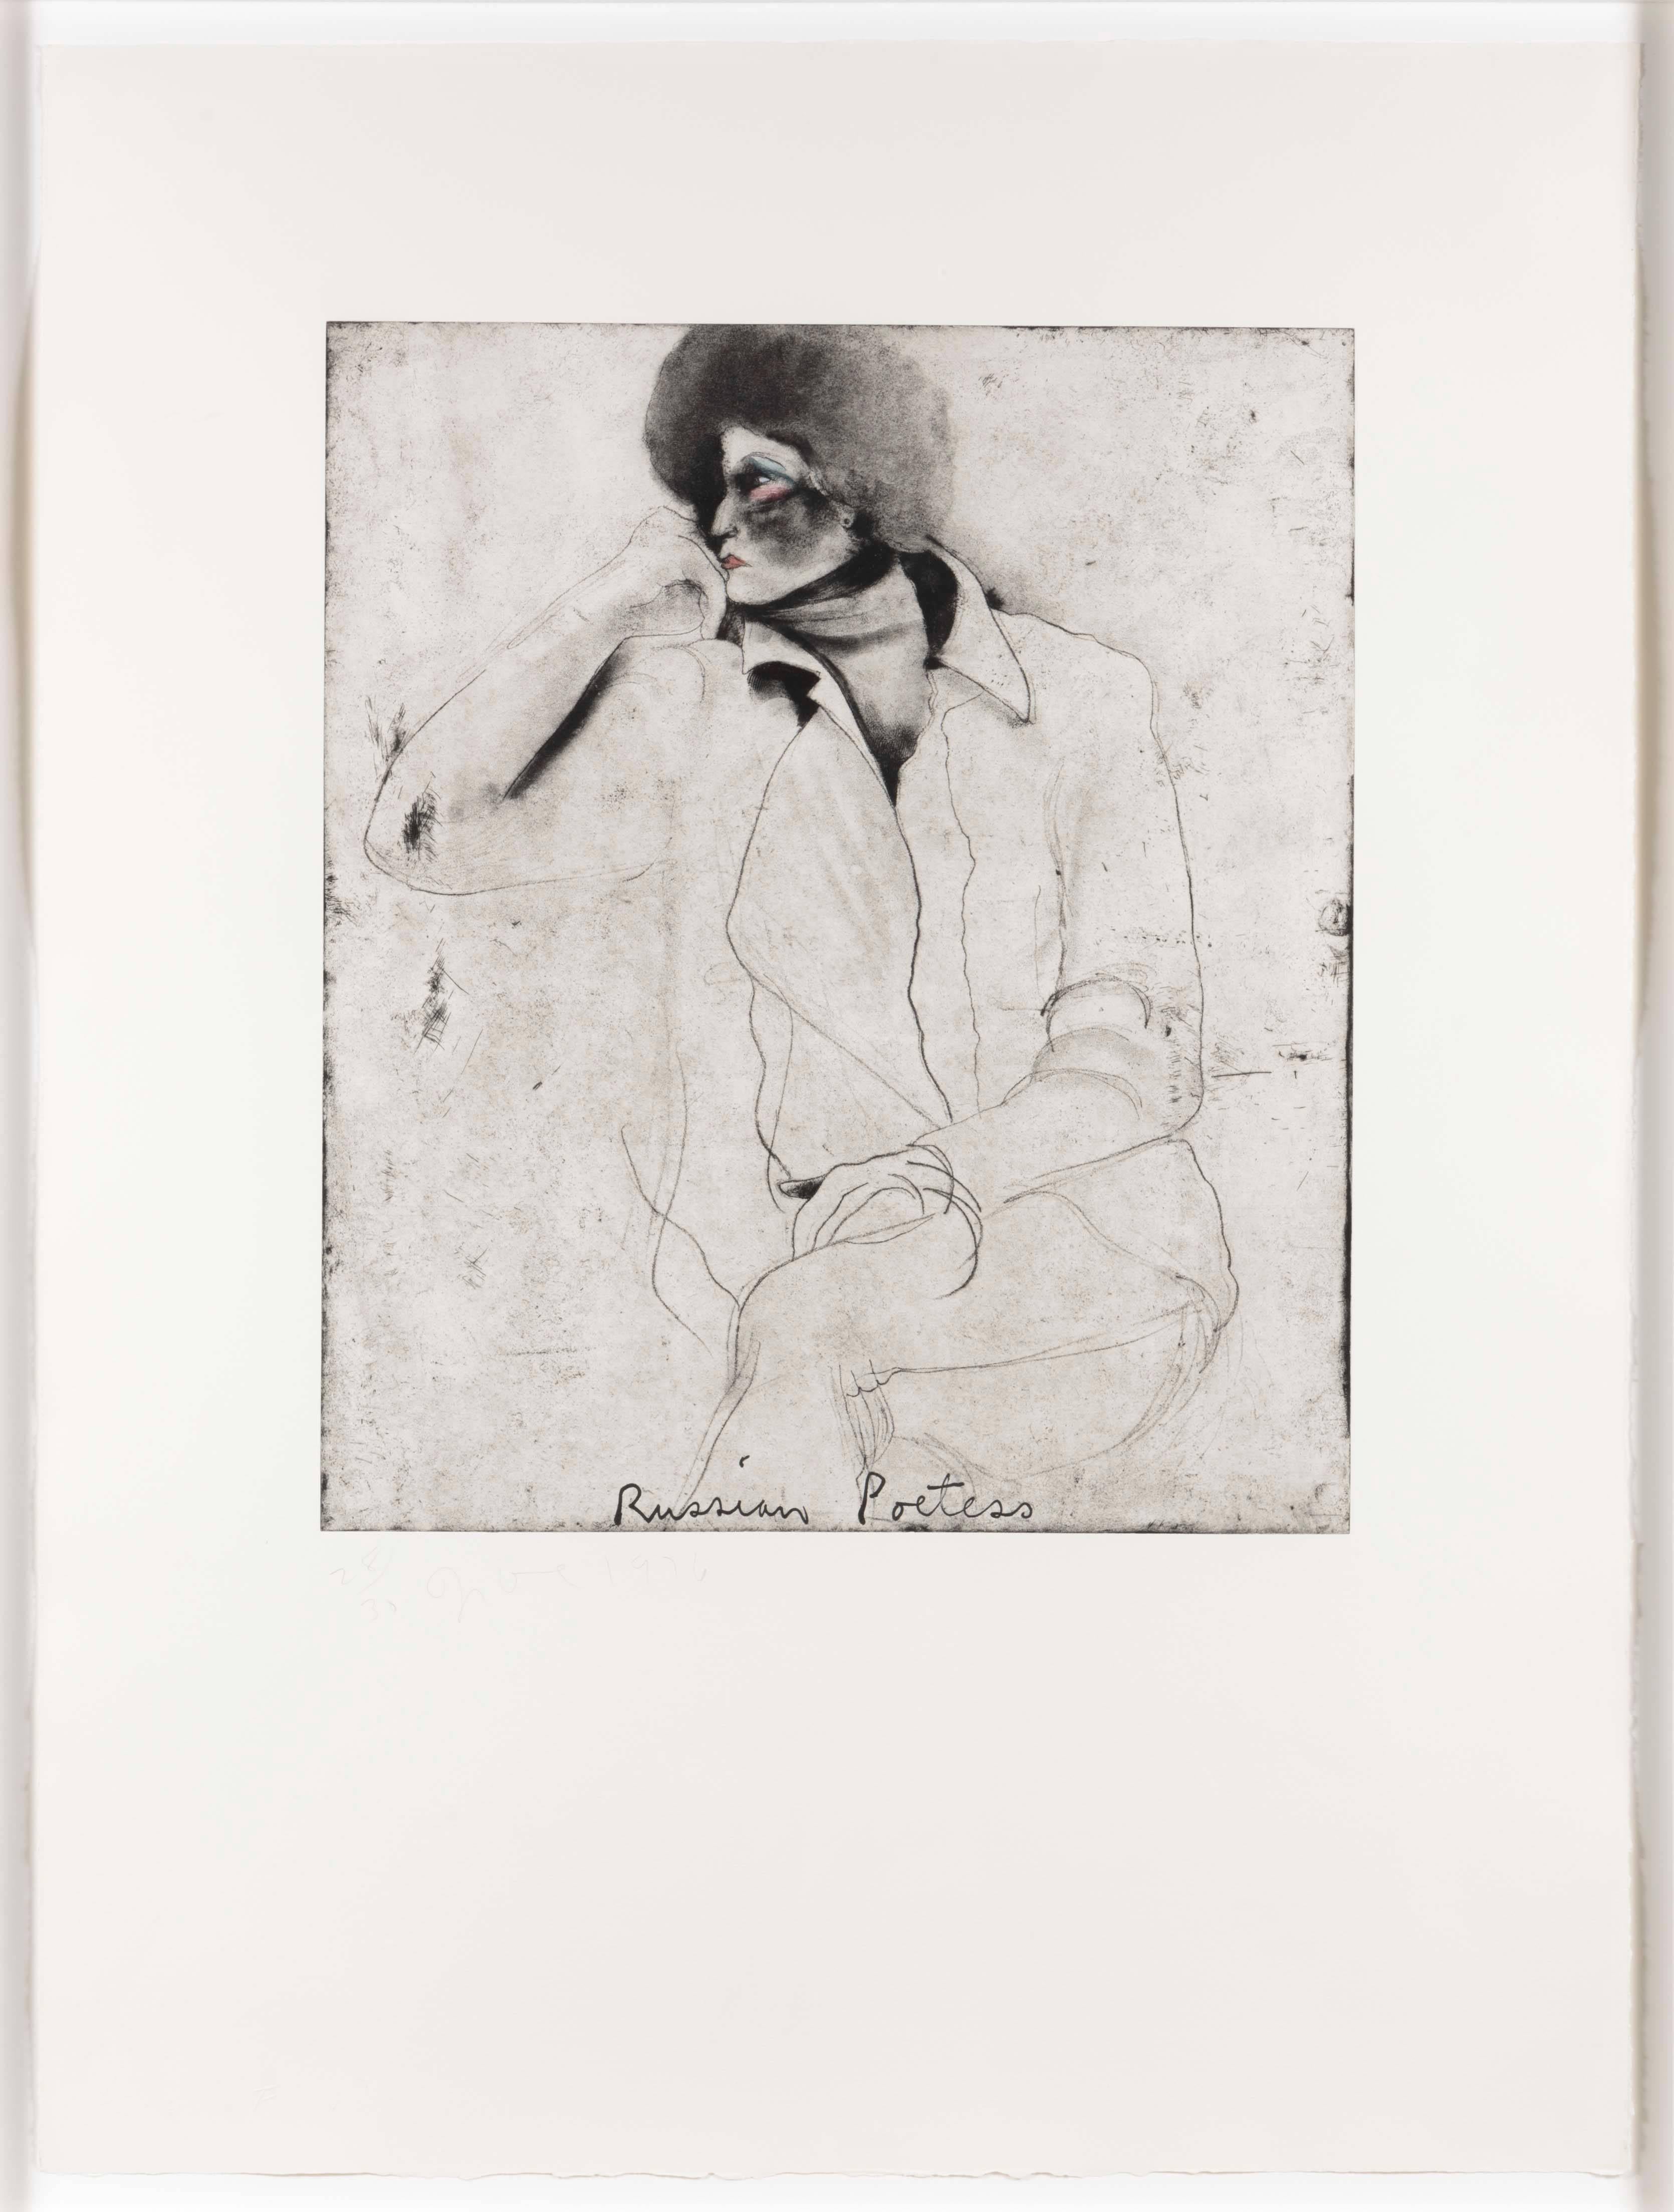 Russian Poetess, from Eight Sheets from an Undefined Novel - Print by Jim Dine